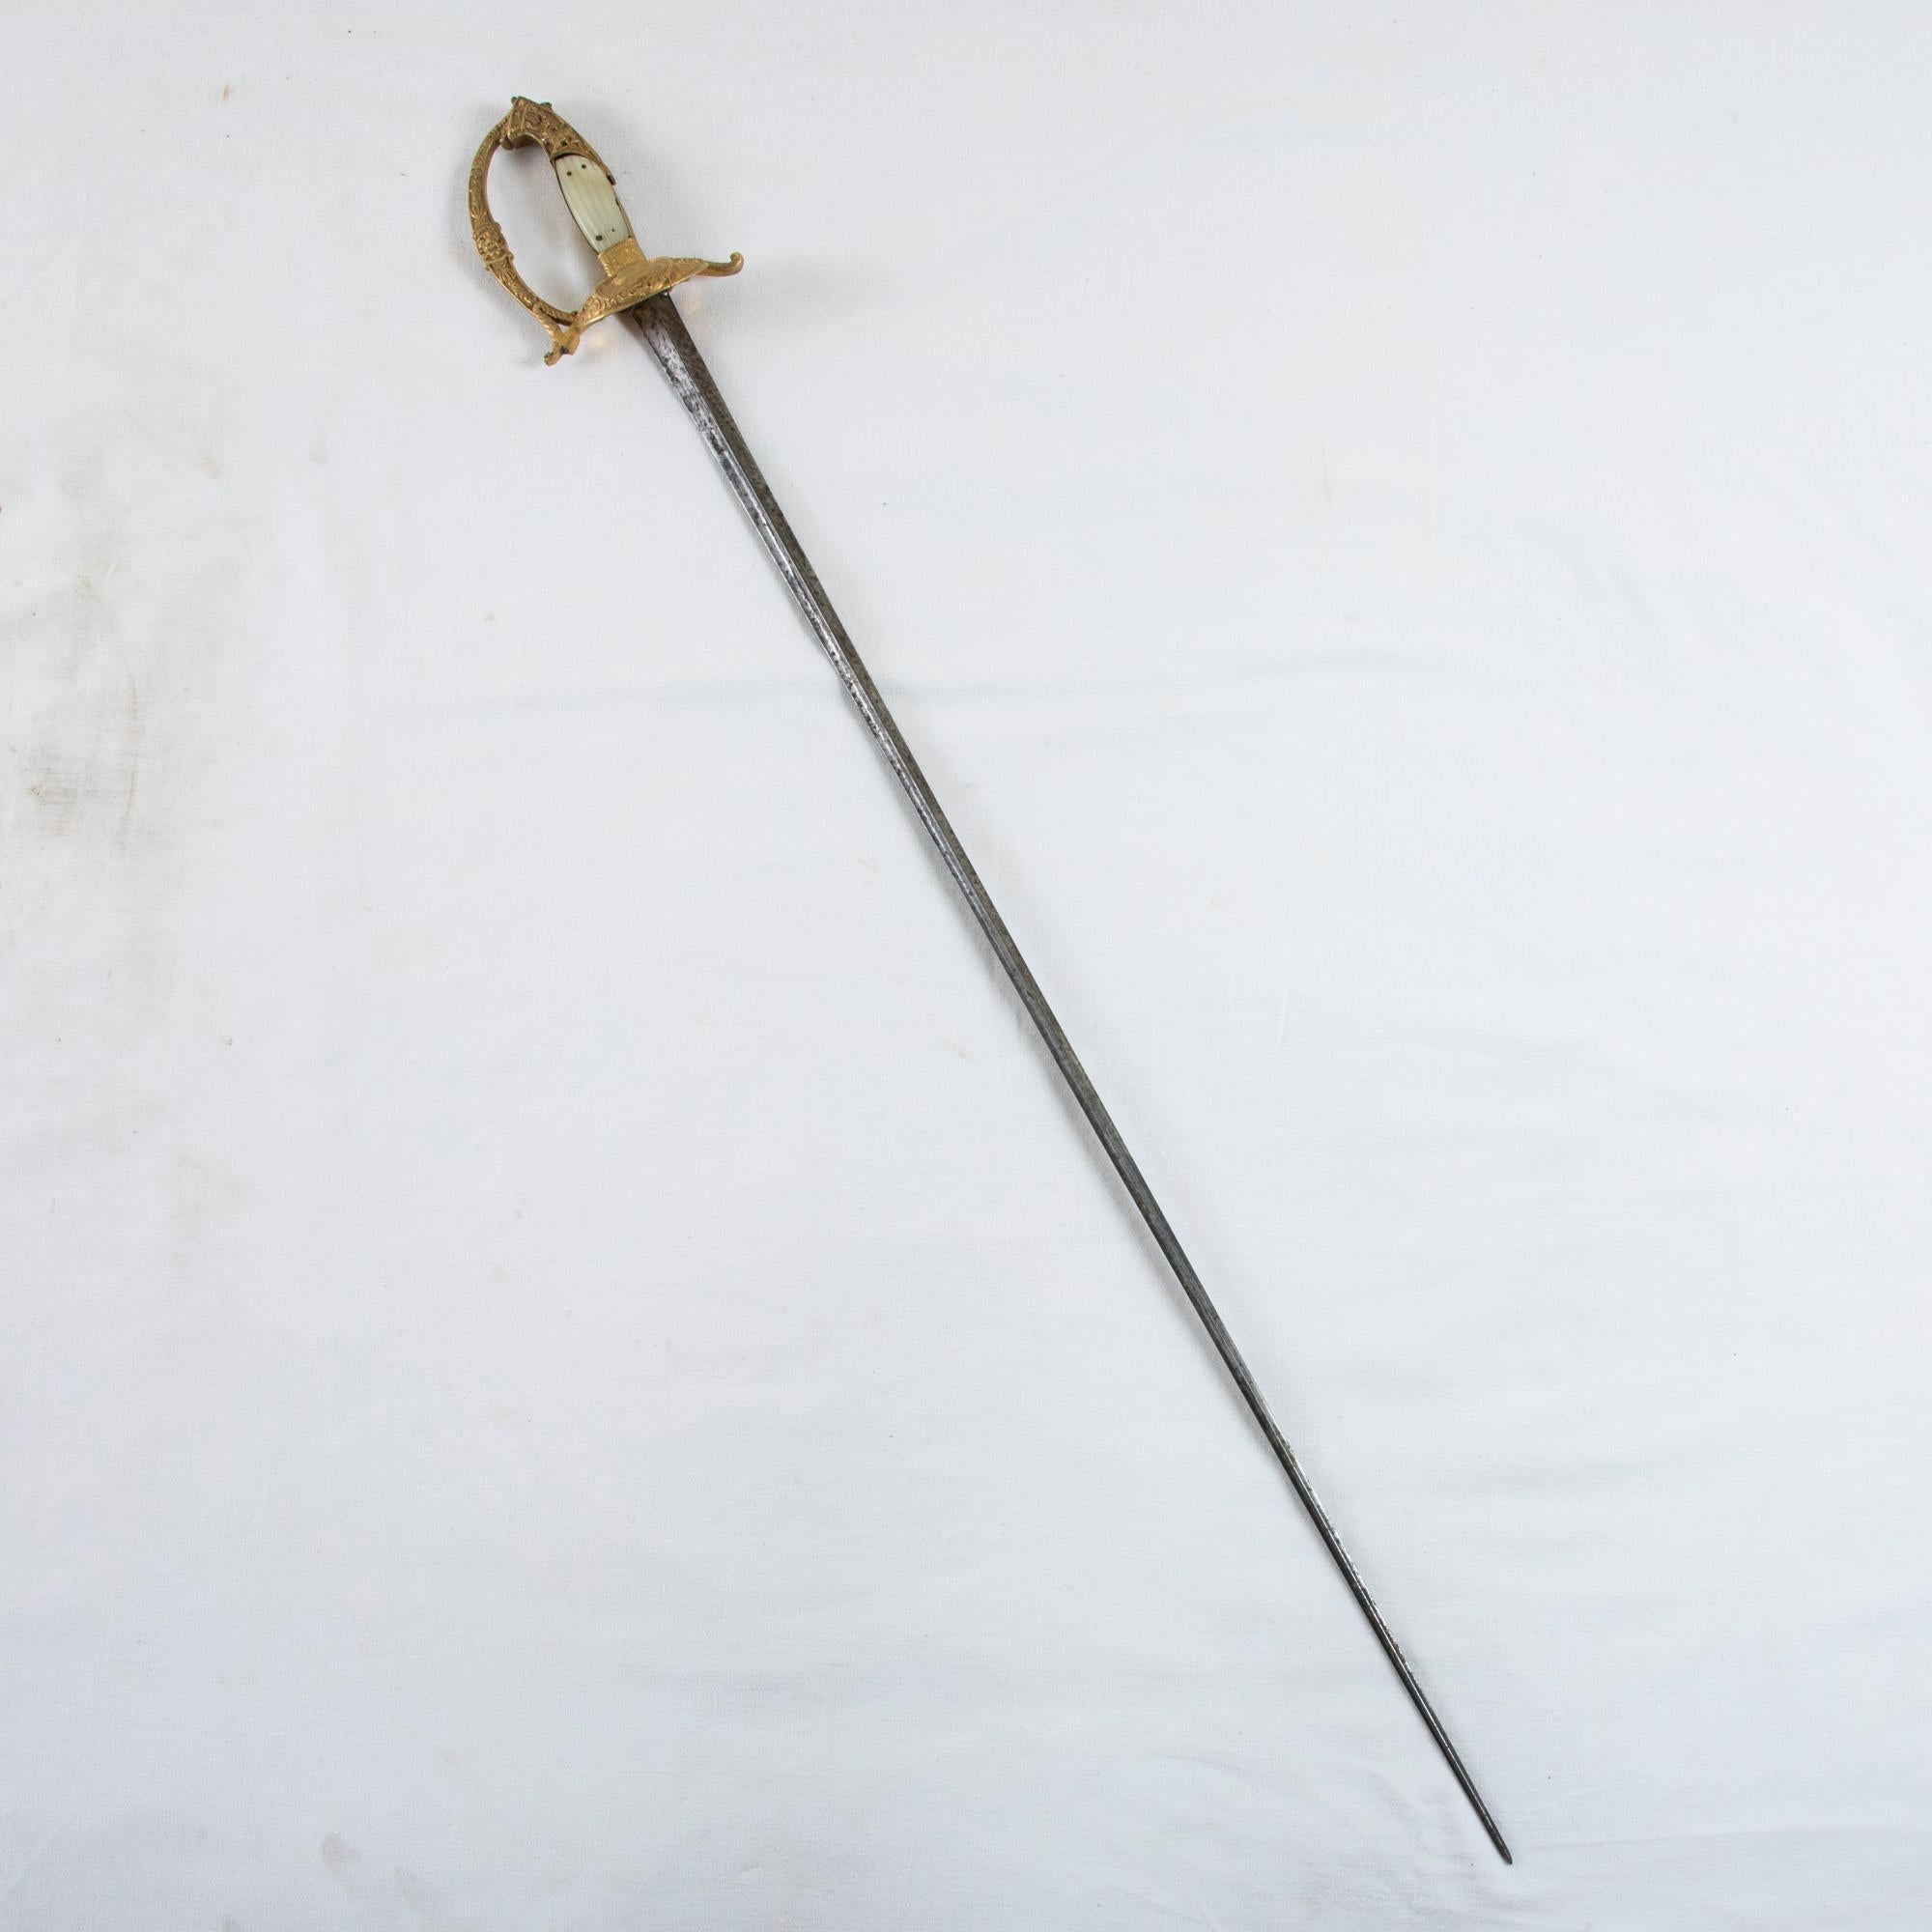 This early nineteenth century ceremonial dress sword features a gilt bronze guard with the profile of Louis XVIII flanked by fleur de lys. Presumably owned by a Frenchman sympathetic to the monarchy after the fall of Napoleon Bonaparte, the hilt